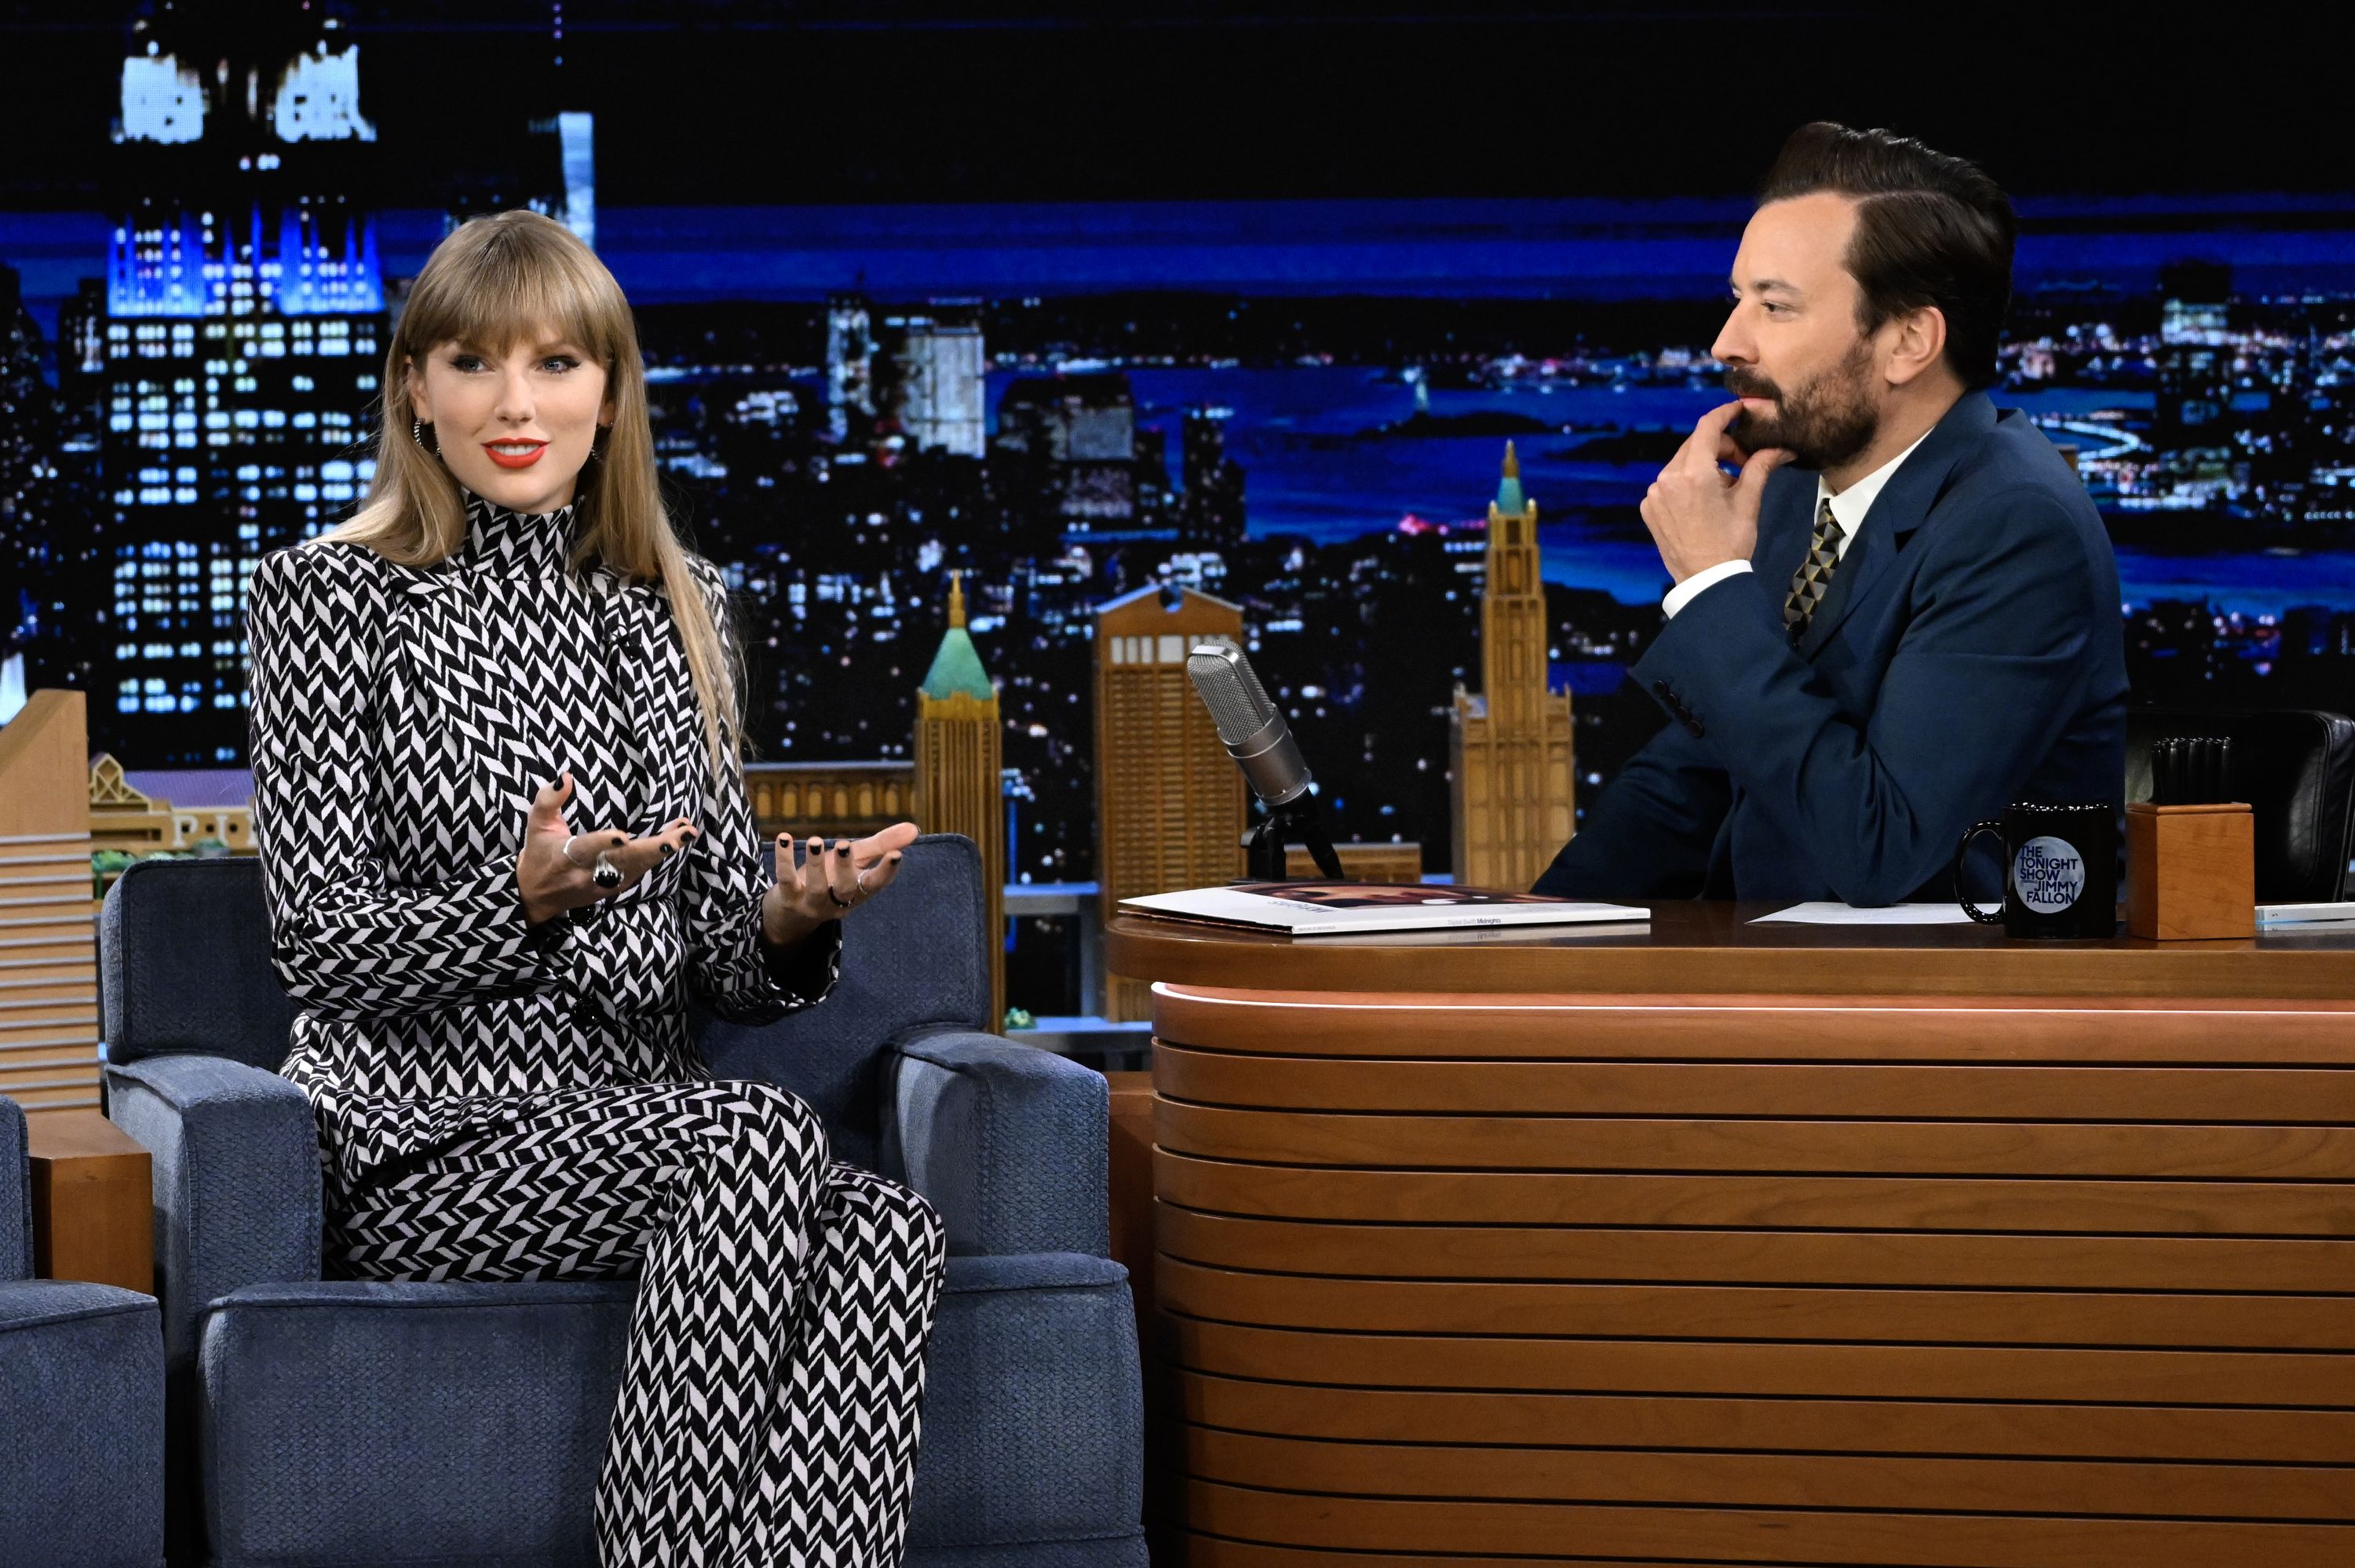 Watch Taylor Swift's reaction when Jimmy Fallon mentions she hasn't toured  in 4 years